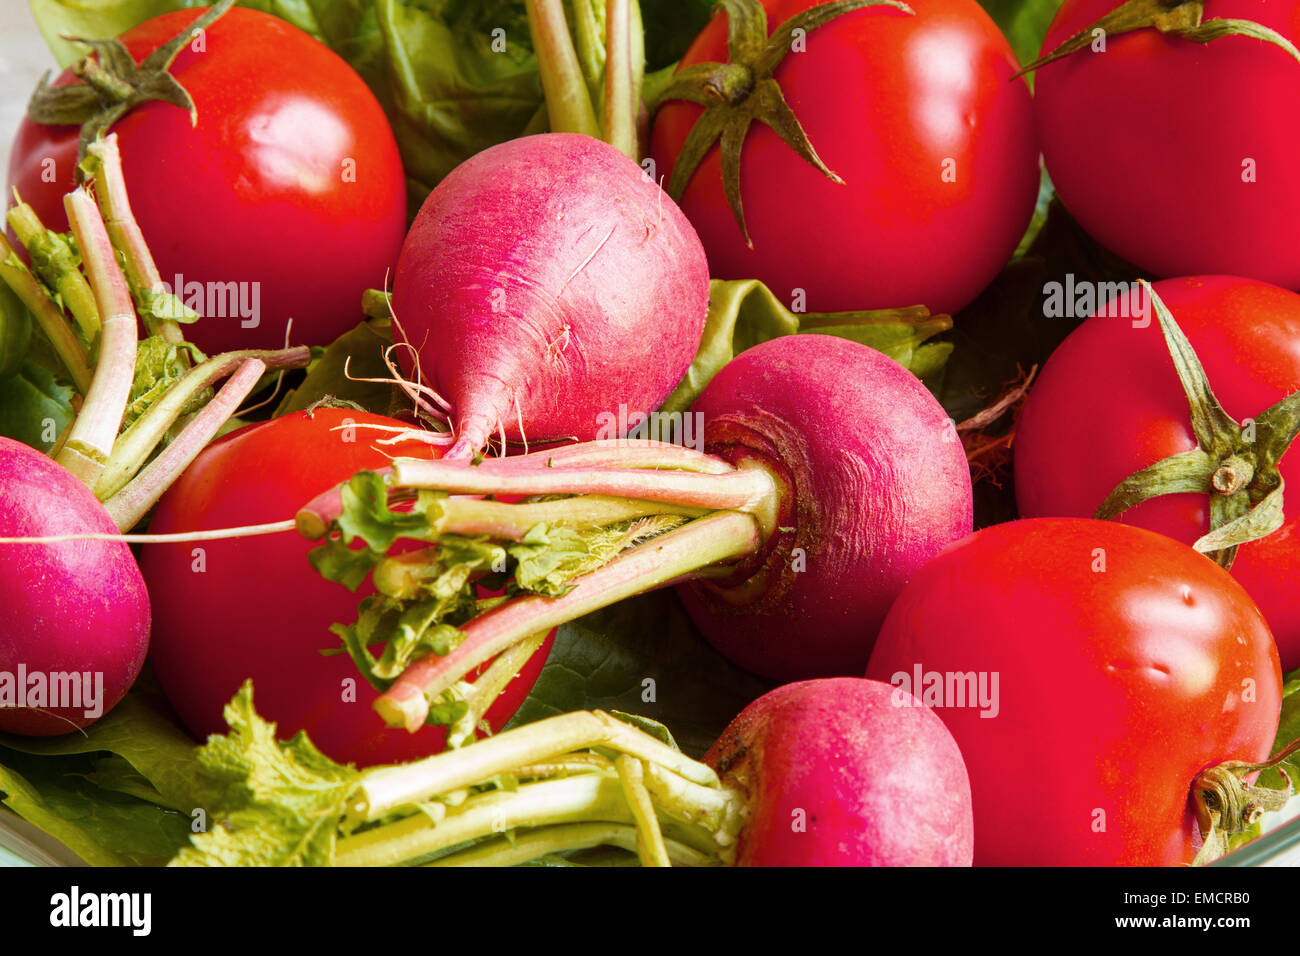 Preparing some vegetables before cooking, background Stock Photo